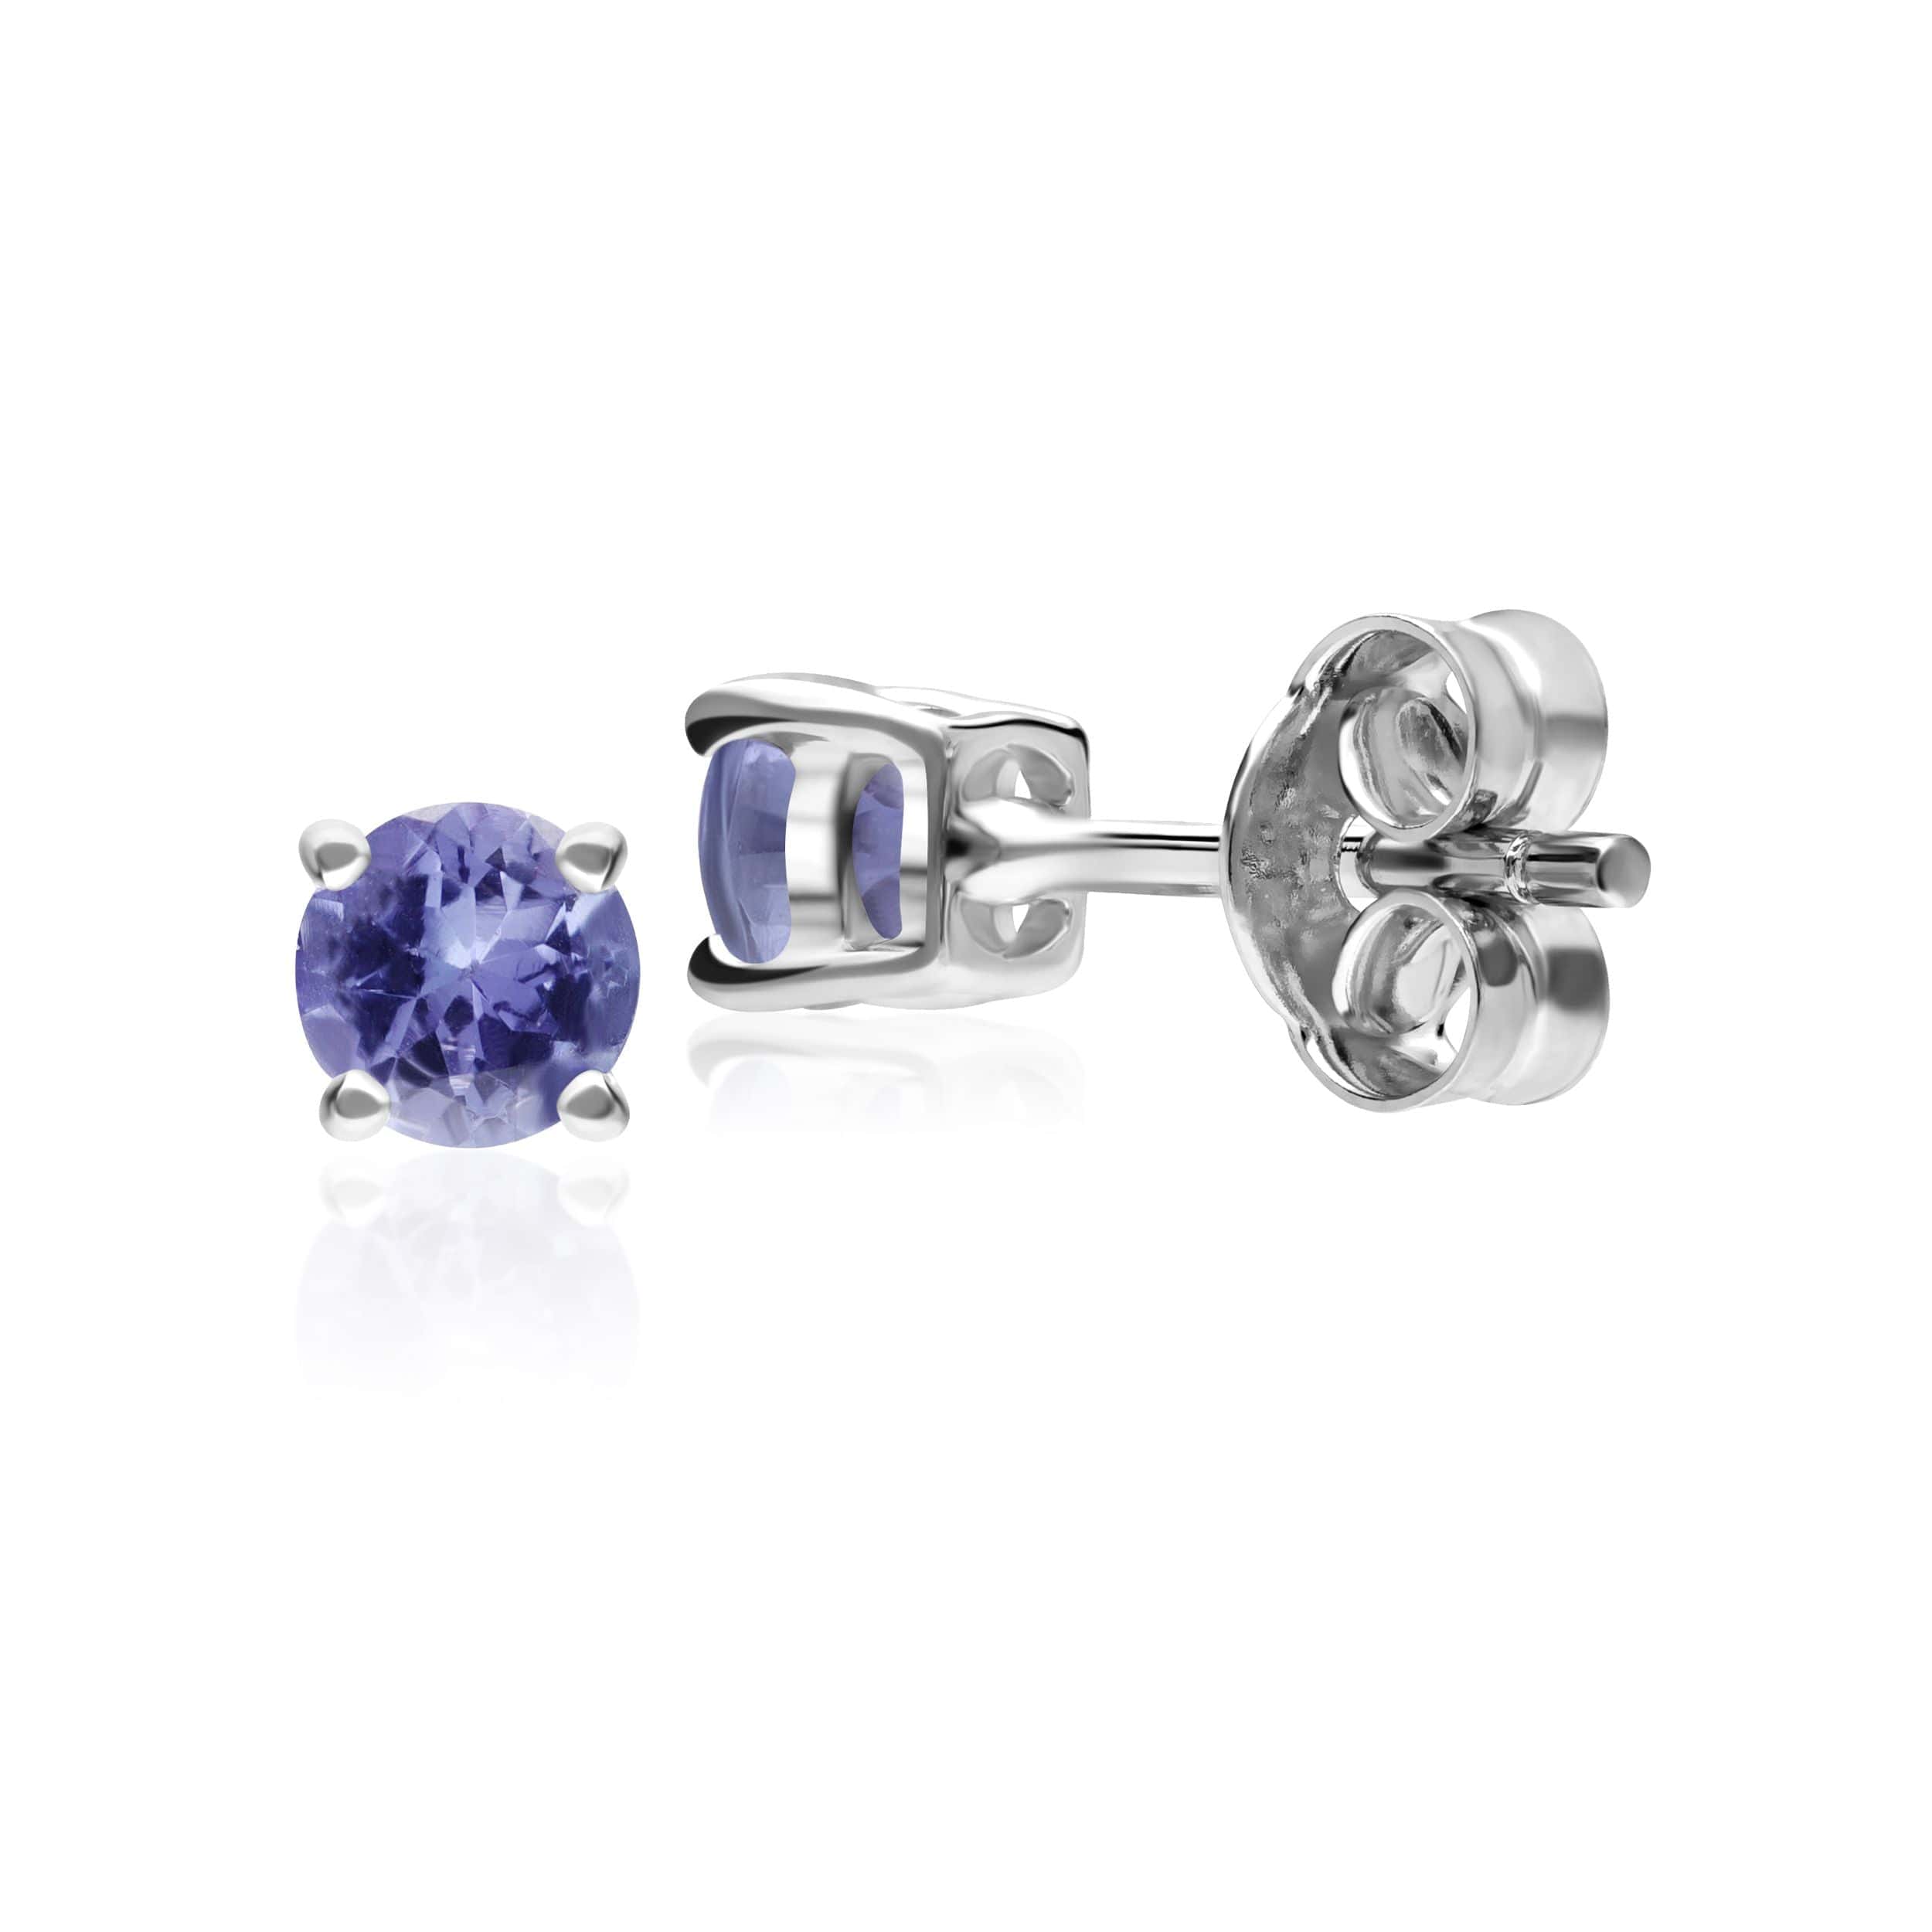 Classic Round Tanzanite Stud Earrings in 9ct White Gold